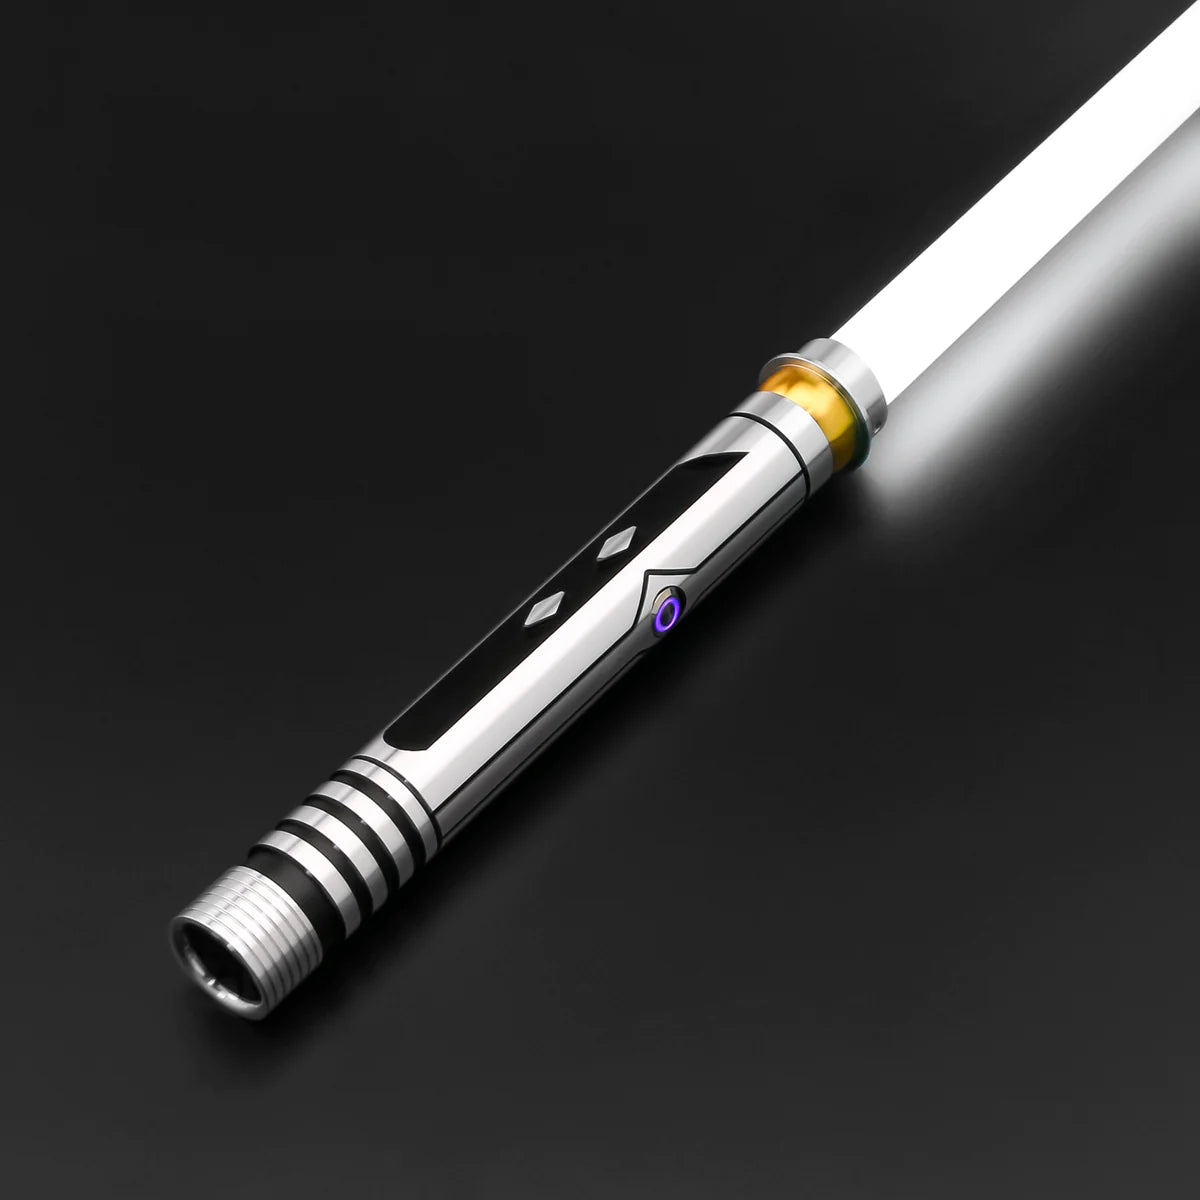 THE EXO TANO LIGHTSABER PAIR